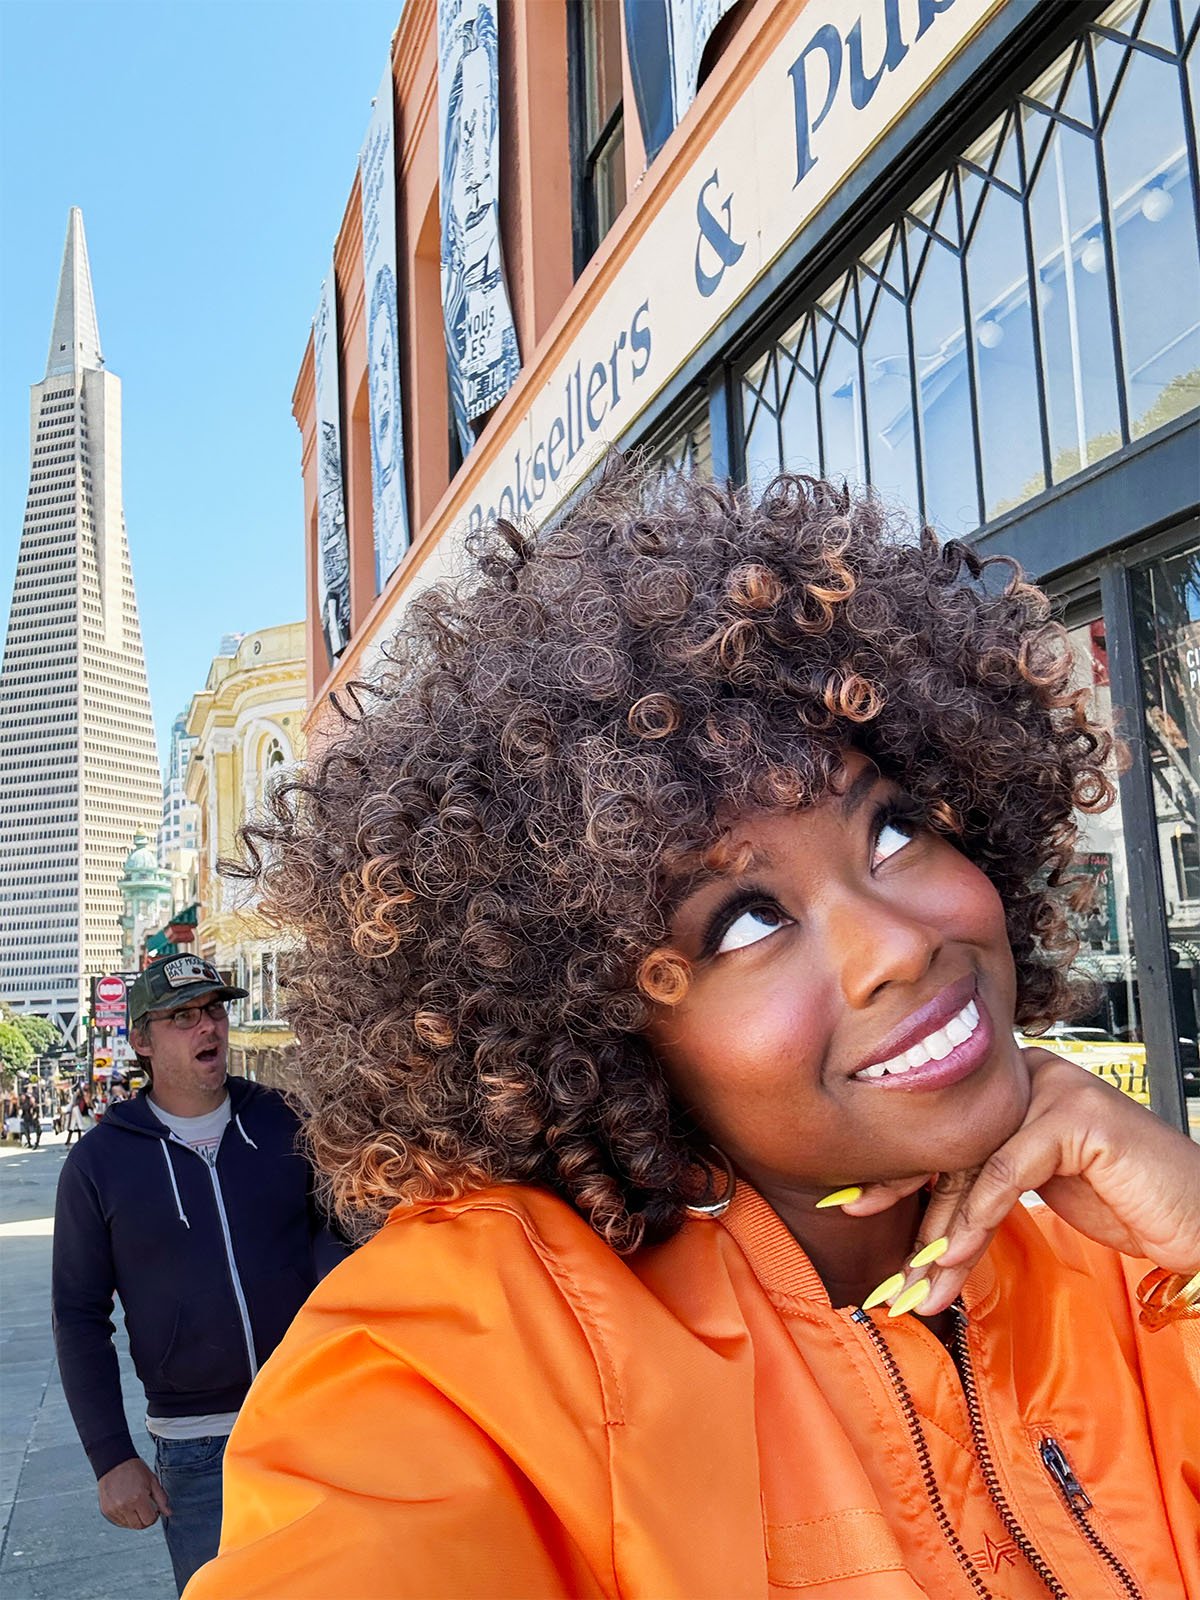 A woman with curly hair and an orange jacket smiles while looking up, standing in front of a building with a sign that reads "Booksellers & Publishers." A man in a hoodie and cap appears surprised in the background. The Transamerica Pyramid is visible behind them.